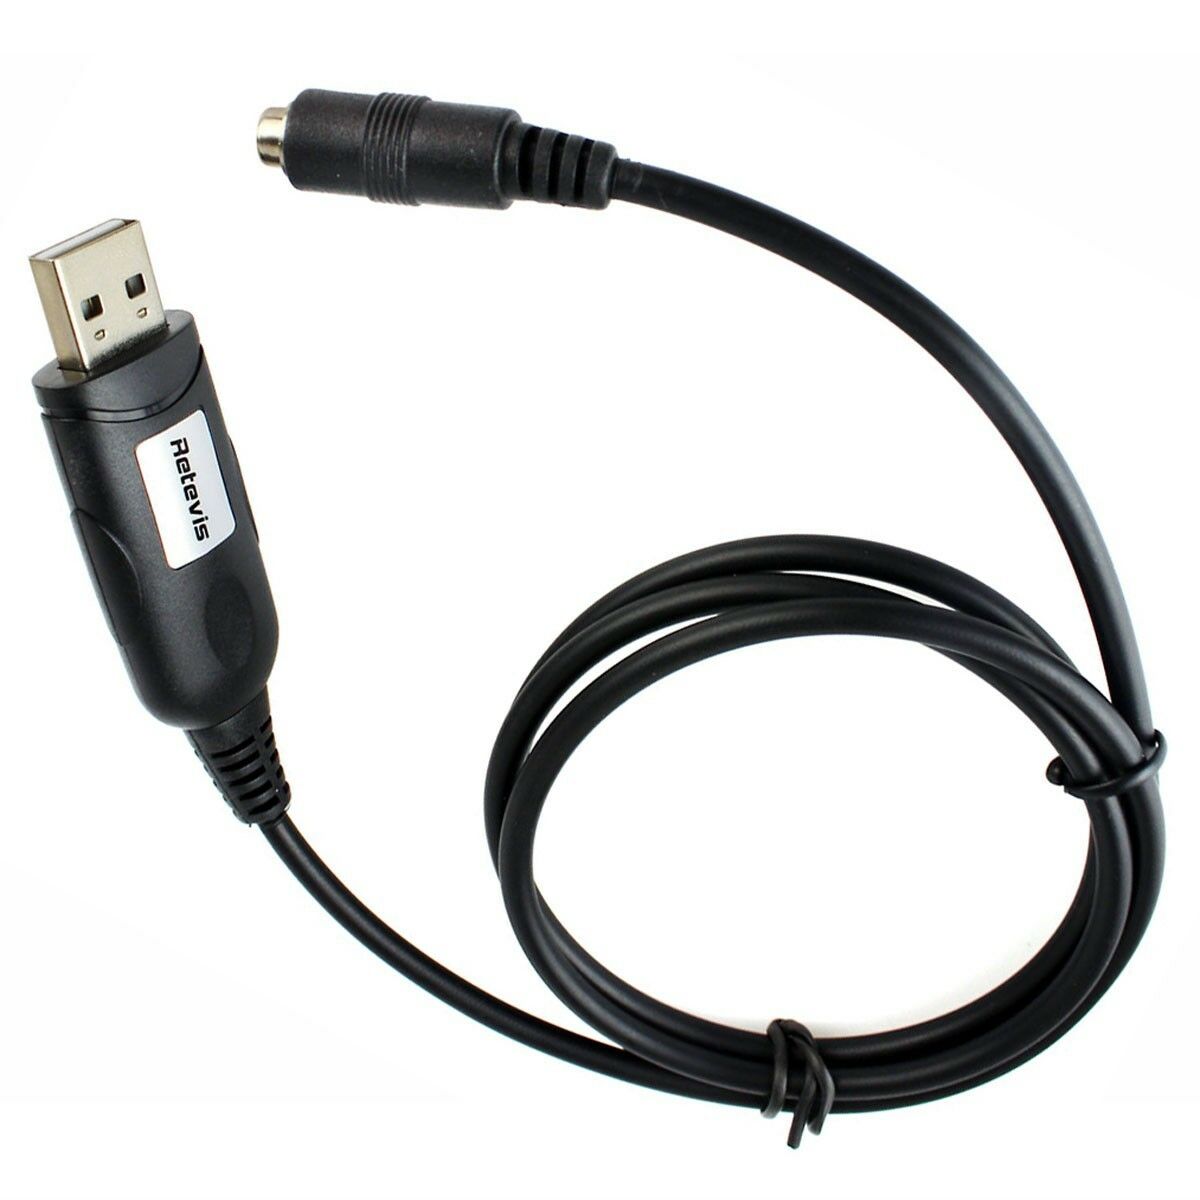 6-in-1 USB Programming Cable Adapters TYT BAOFENG